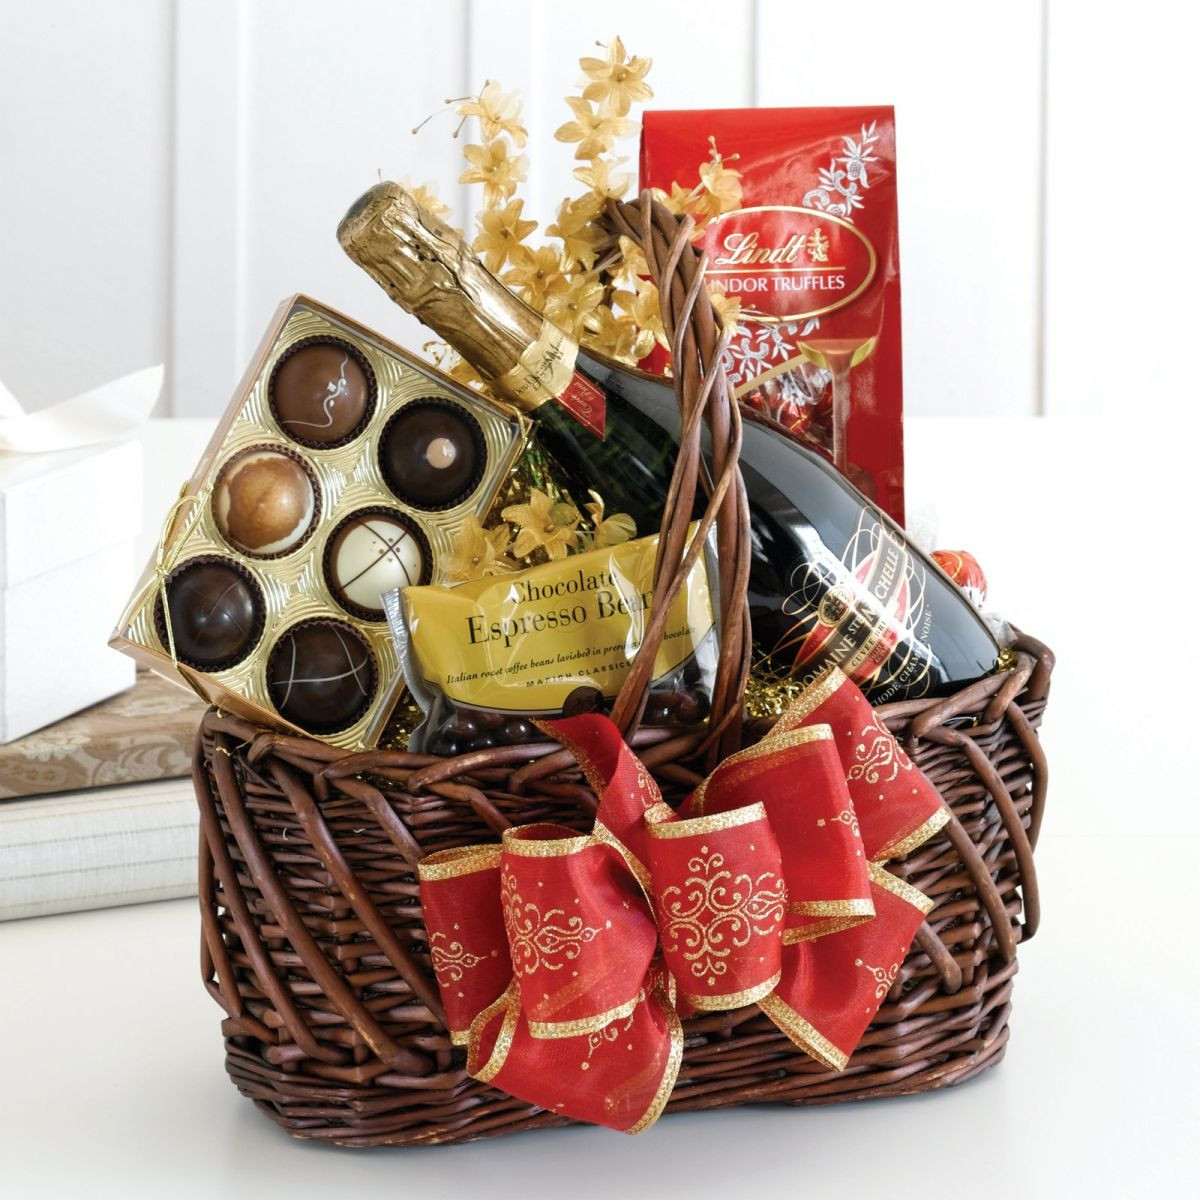 Holiday Gift Basket Ideas
 Collectibles And Gifts Chocolate Gift Basket Ideas